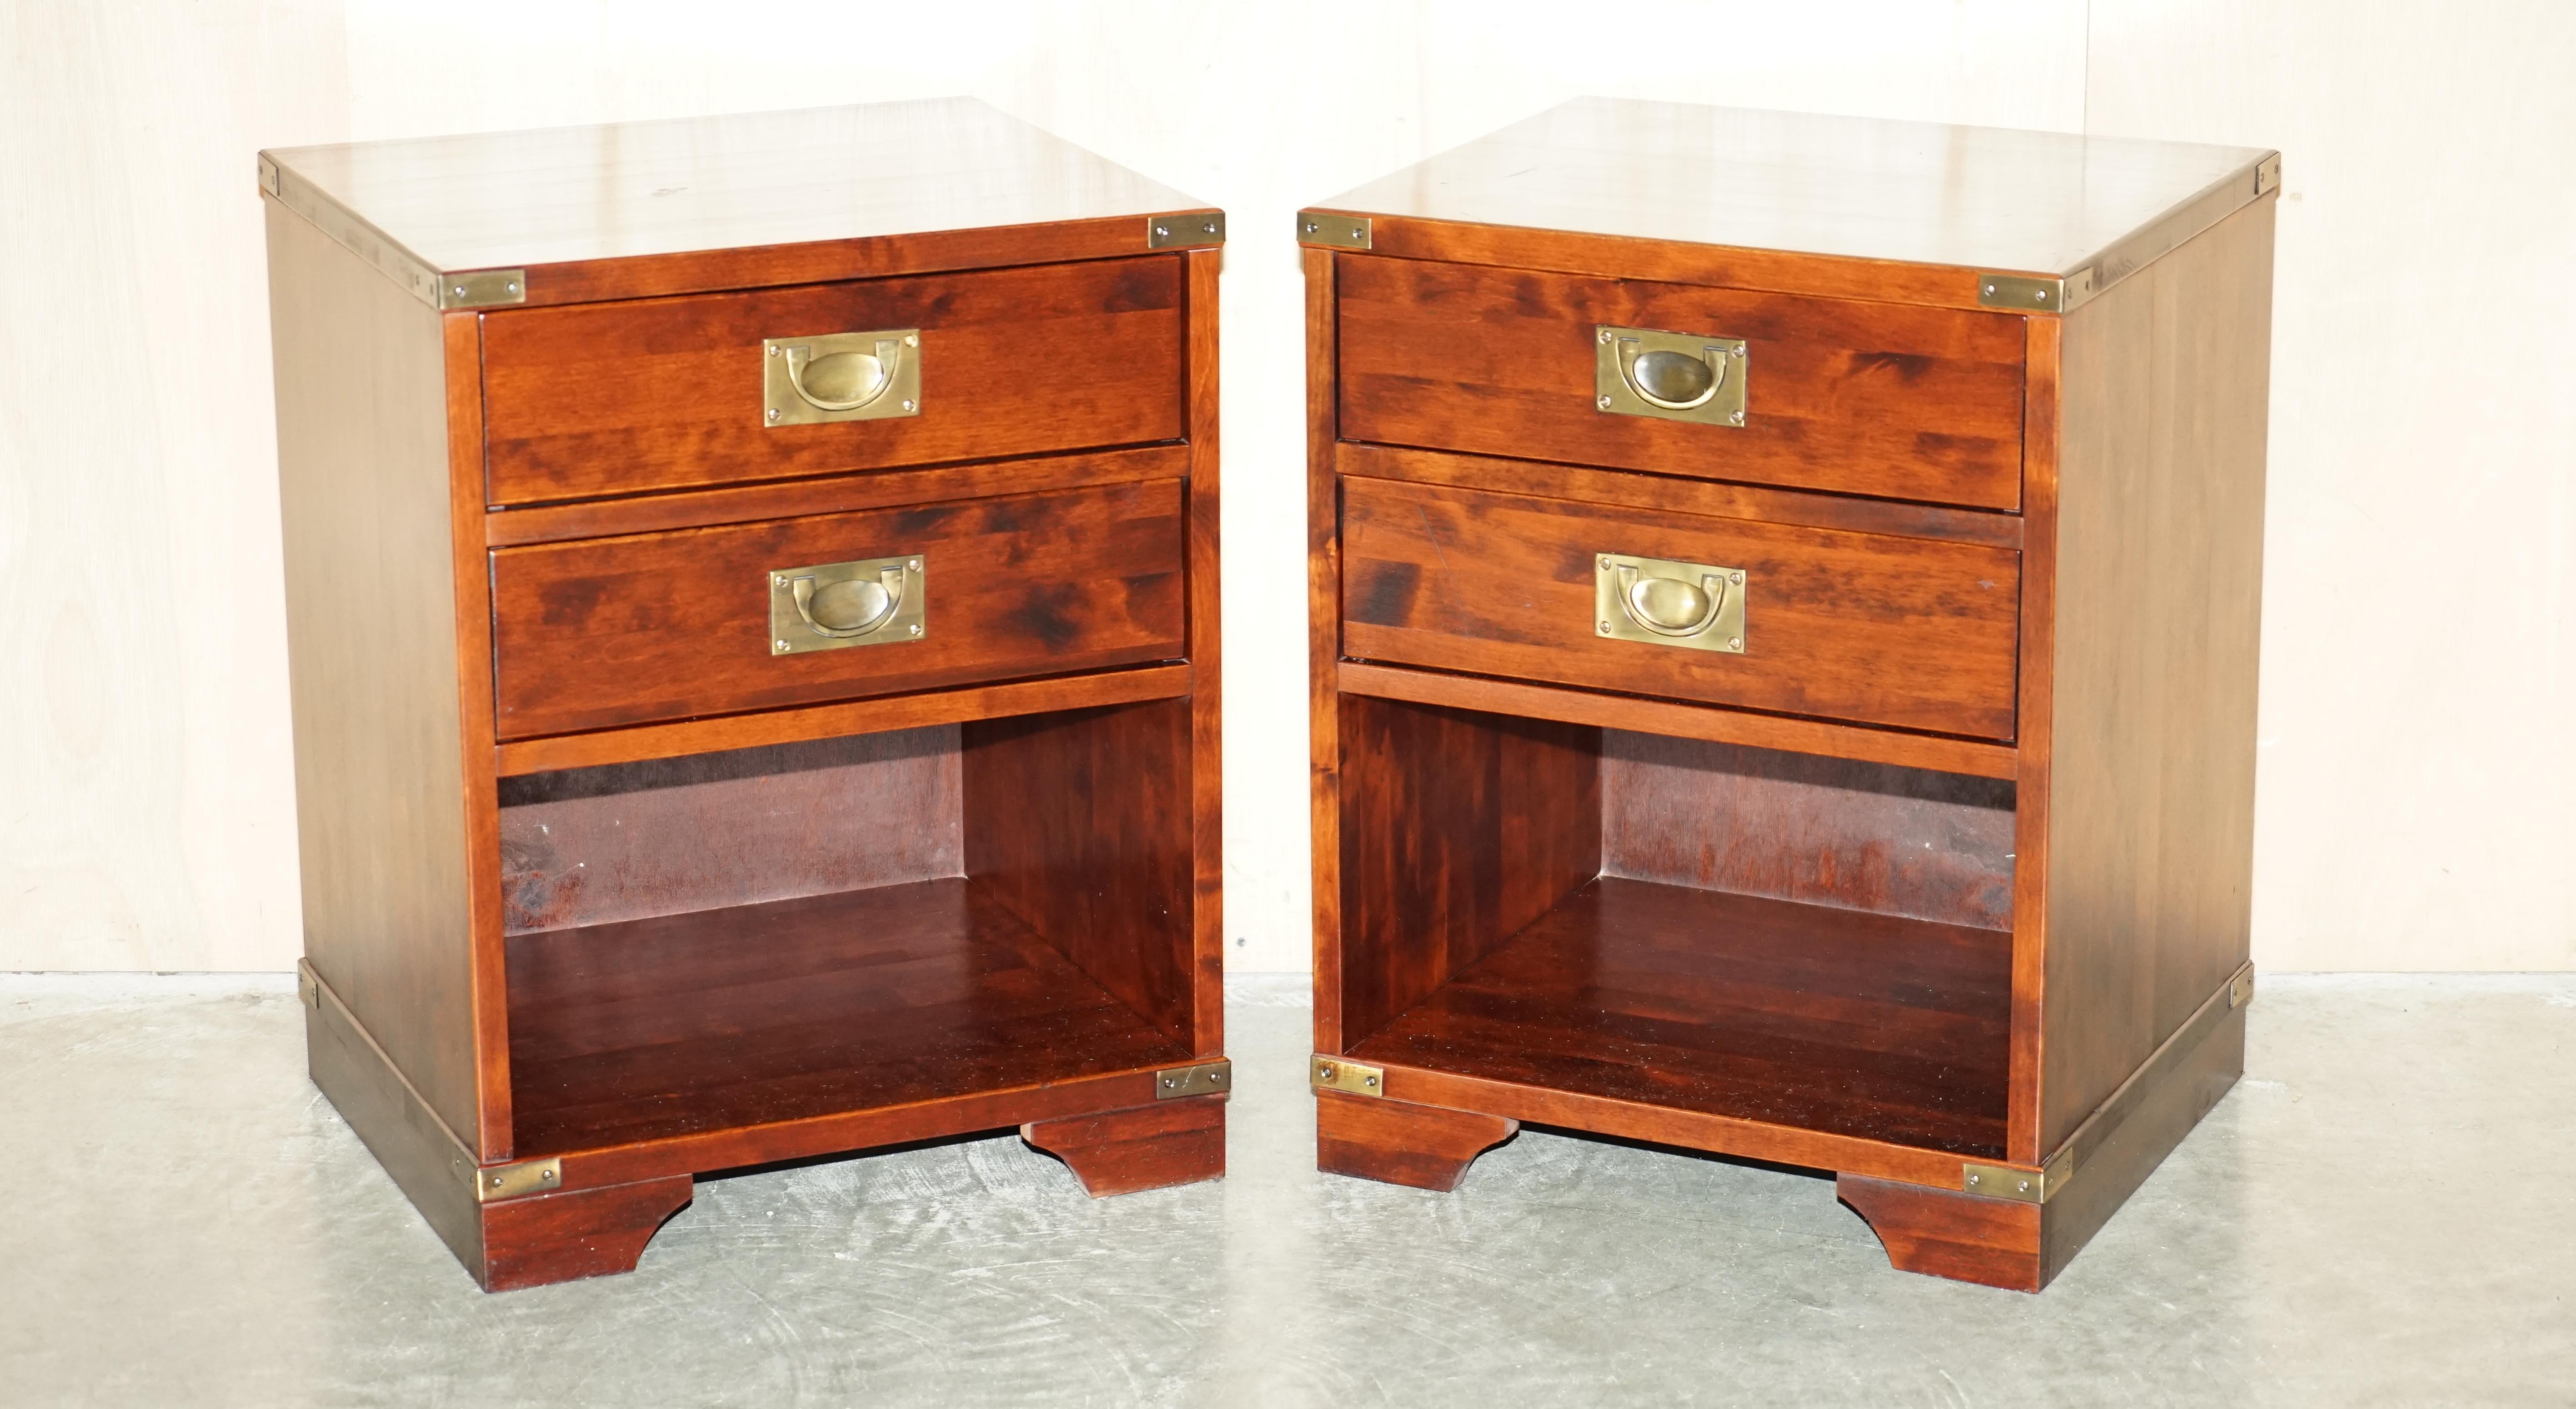 Royal House Antiques

Royal House Antiques is delighted to offer for sale this lovely pair of vintage hardwood & brass Military Campaign style side tables with drawers

Please note the delivery fee listed is just a guide, it covers within the M25